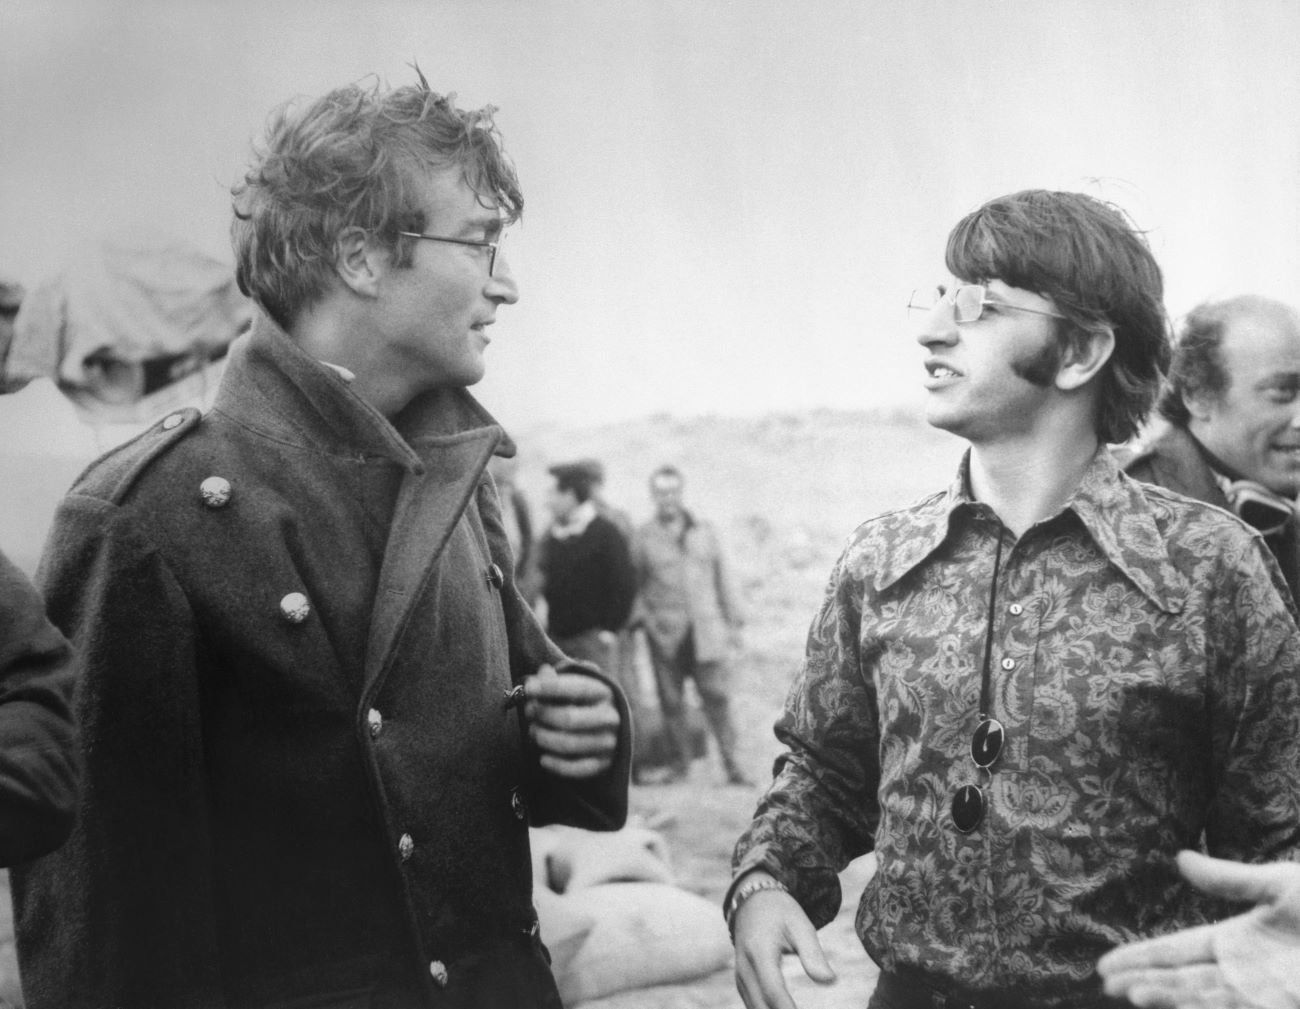 A black and white photo of John Lennon and Ringo Starr talking to each other on a movie set.